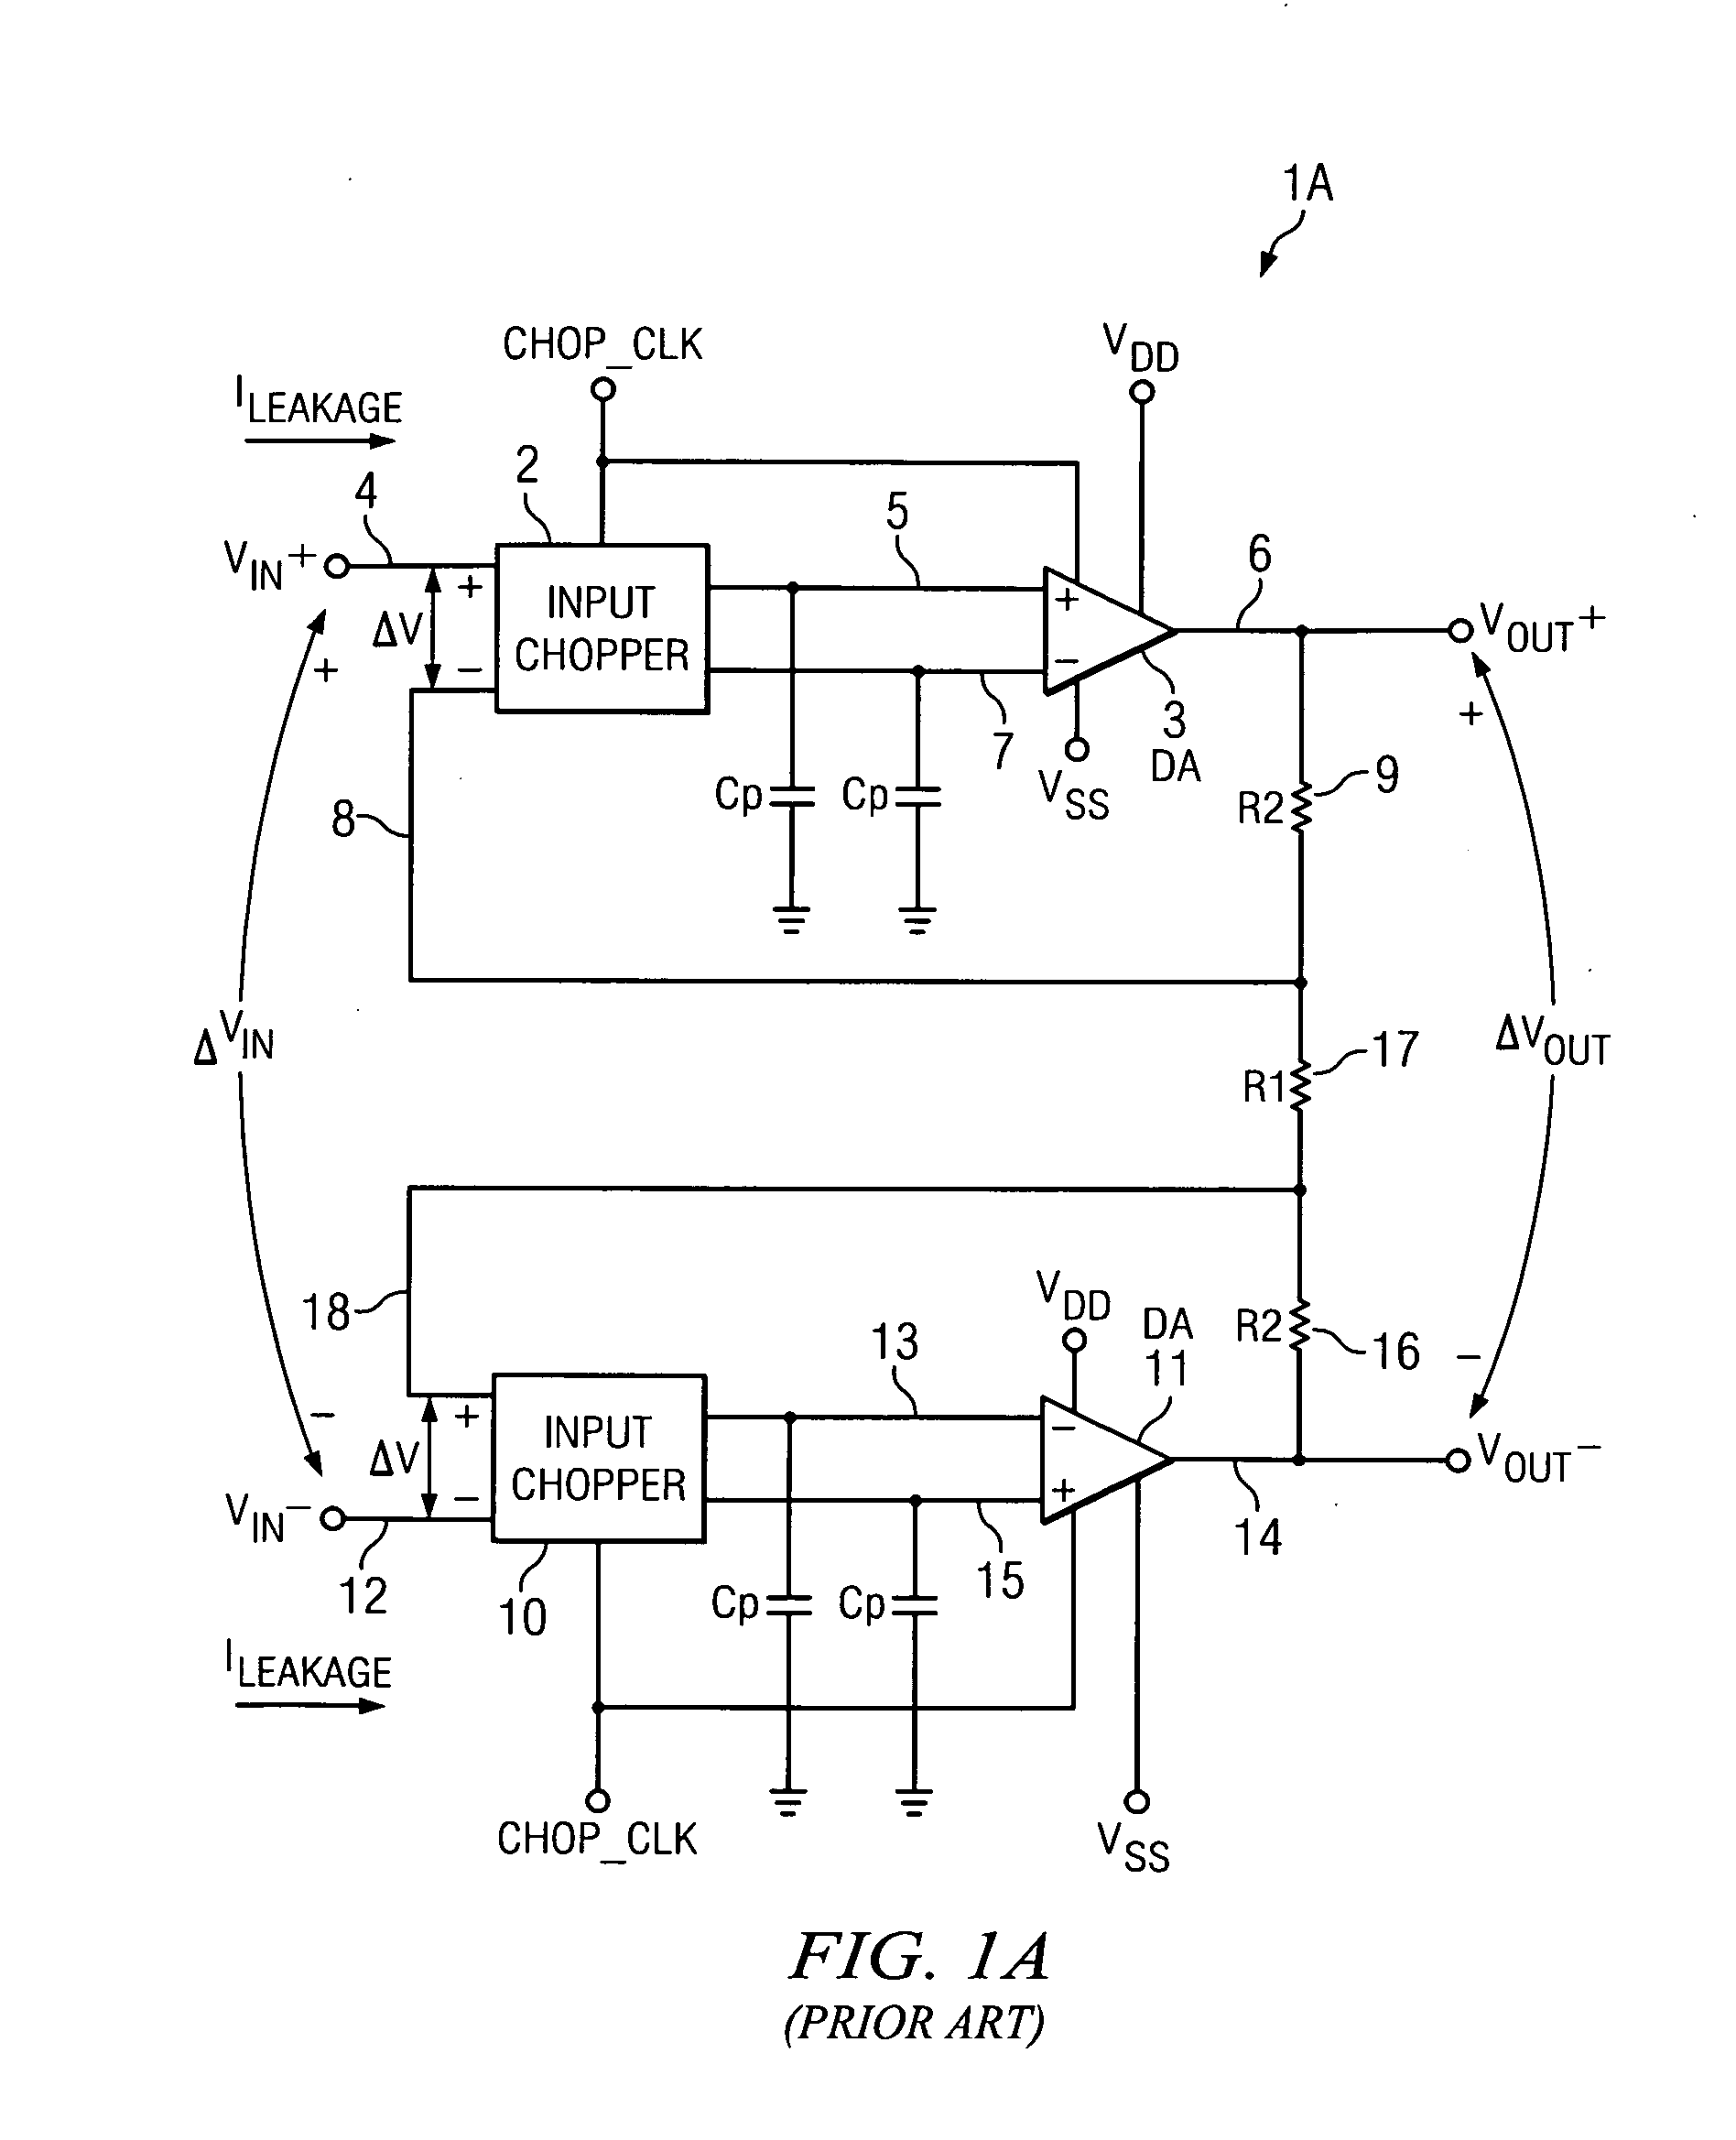 Circuit and method for reducing input leakage in chopped amplifier during overload conditions